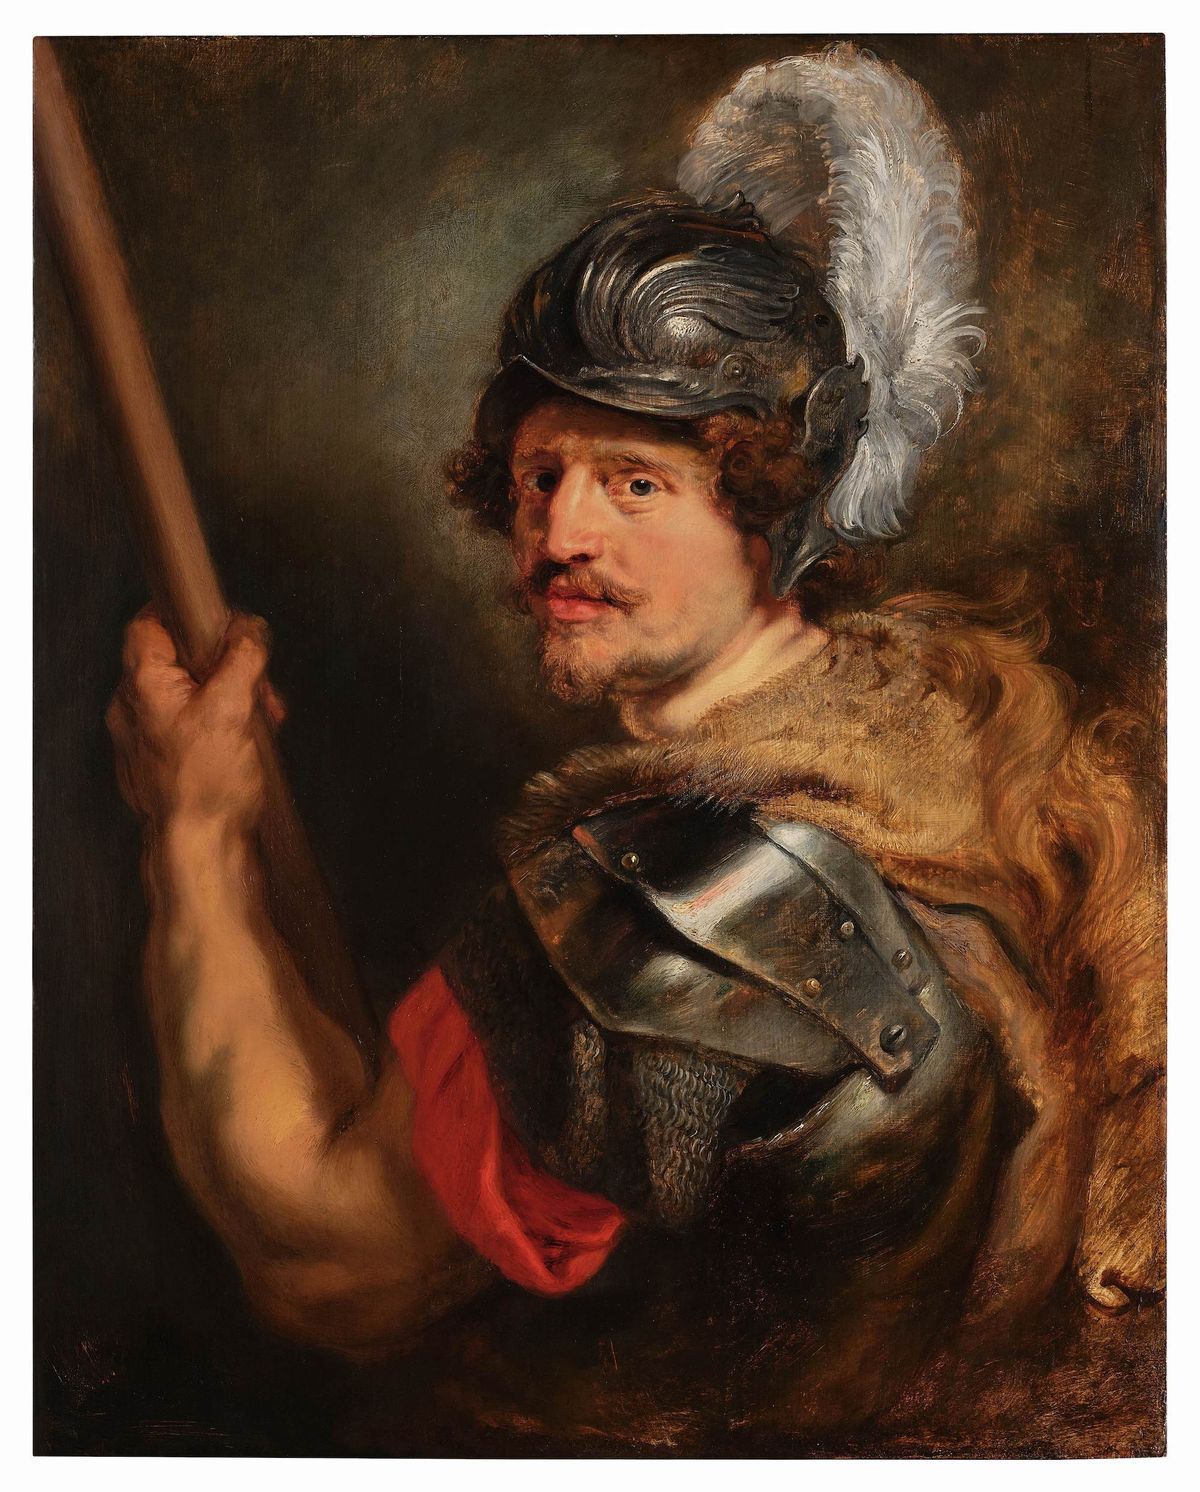 Peter Paul Rubens, Portrait of a Man as the God Mars, around 1620 Courtesy Sotheby's